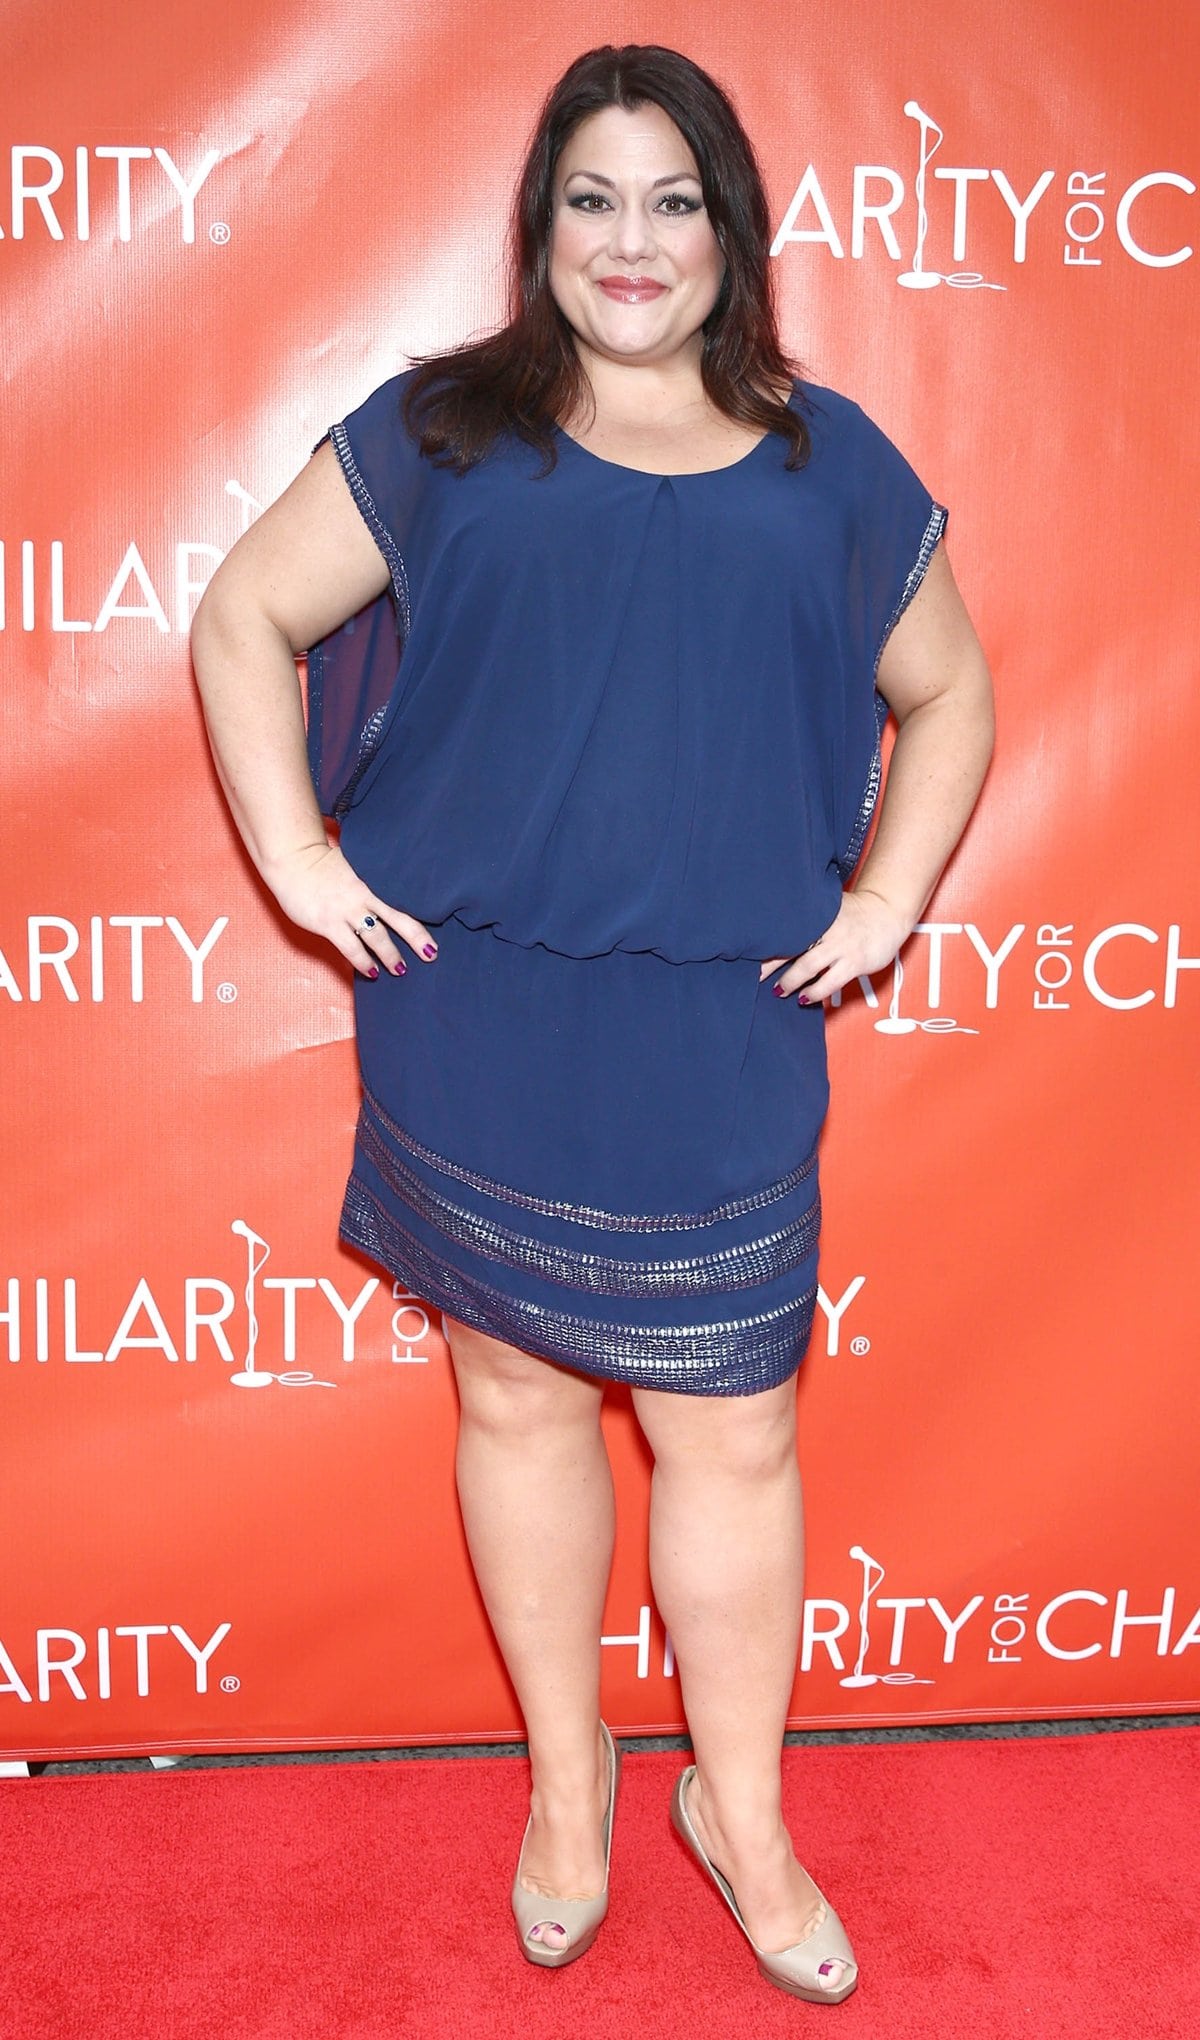 Actress Brooke Elliott flaunts her legs in a blue dress at Hilarity for Charity's Third Annual New York City Variety Show